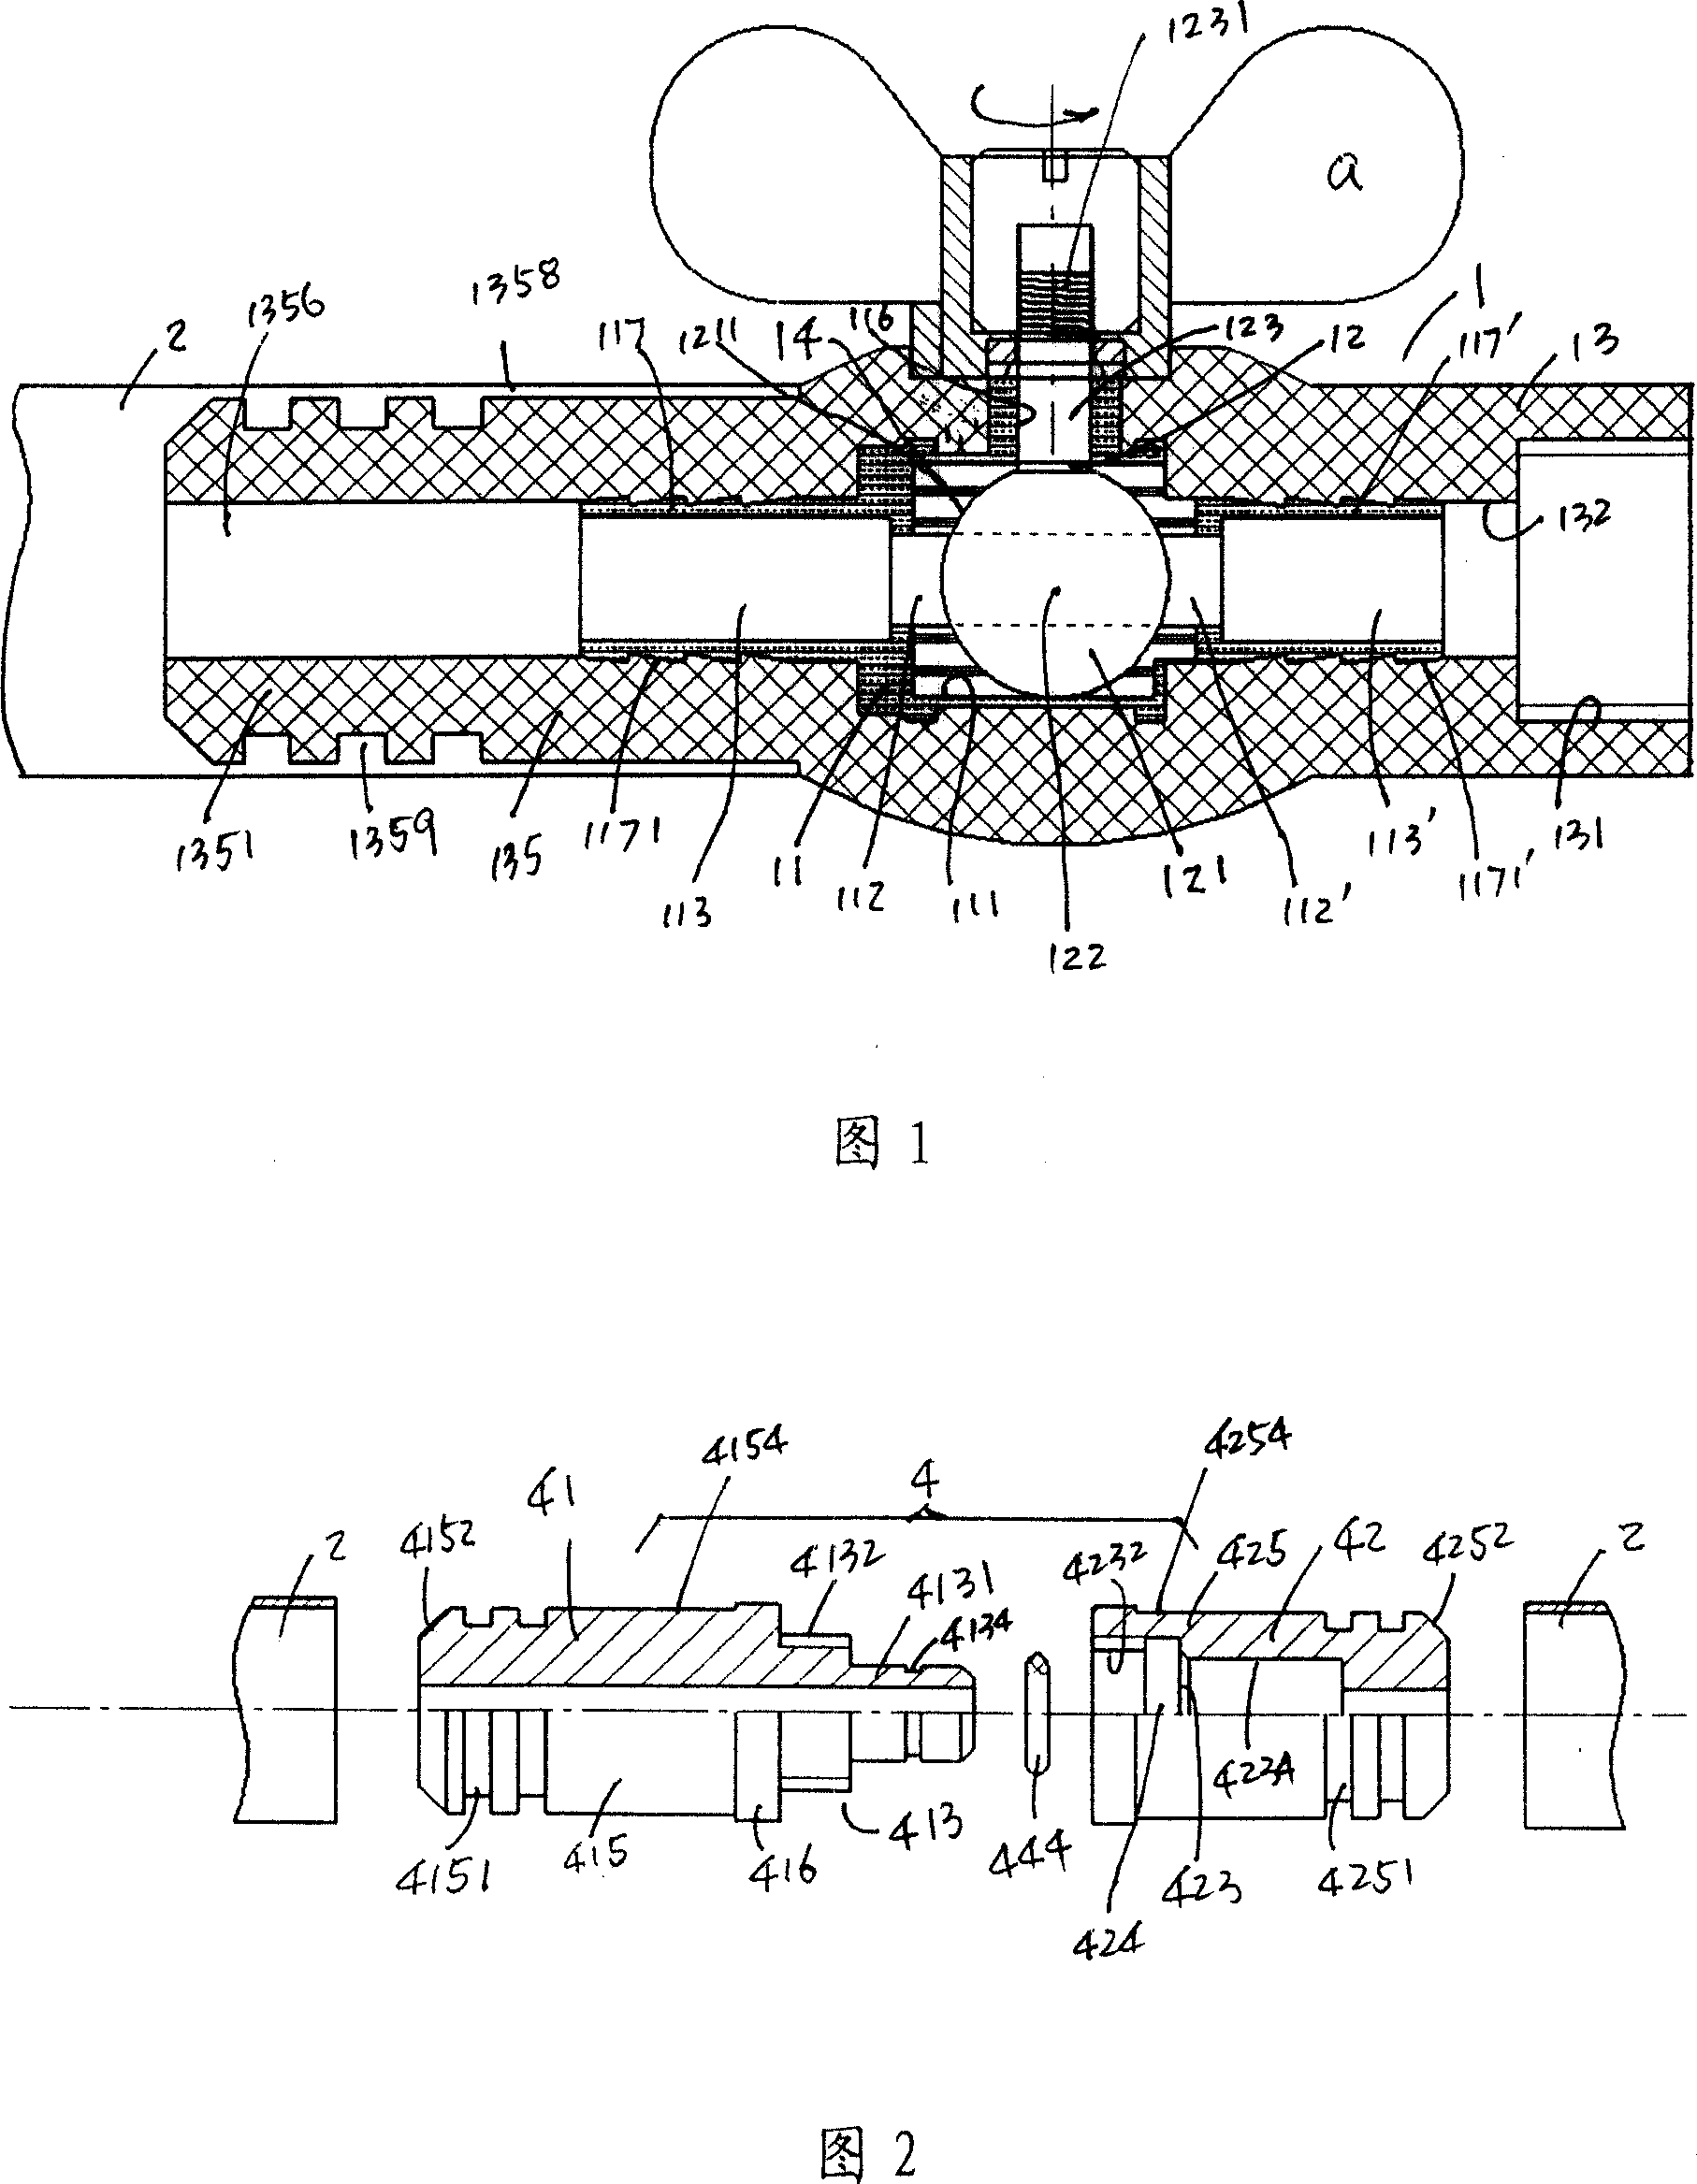 Water flow controller for water sprinkler and its tool handle